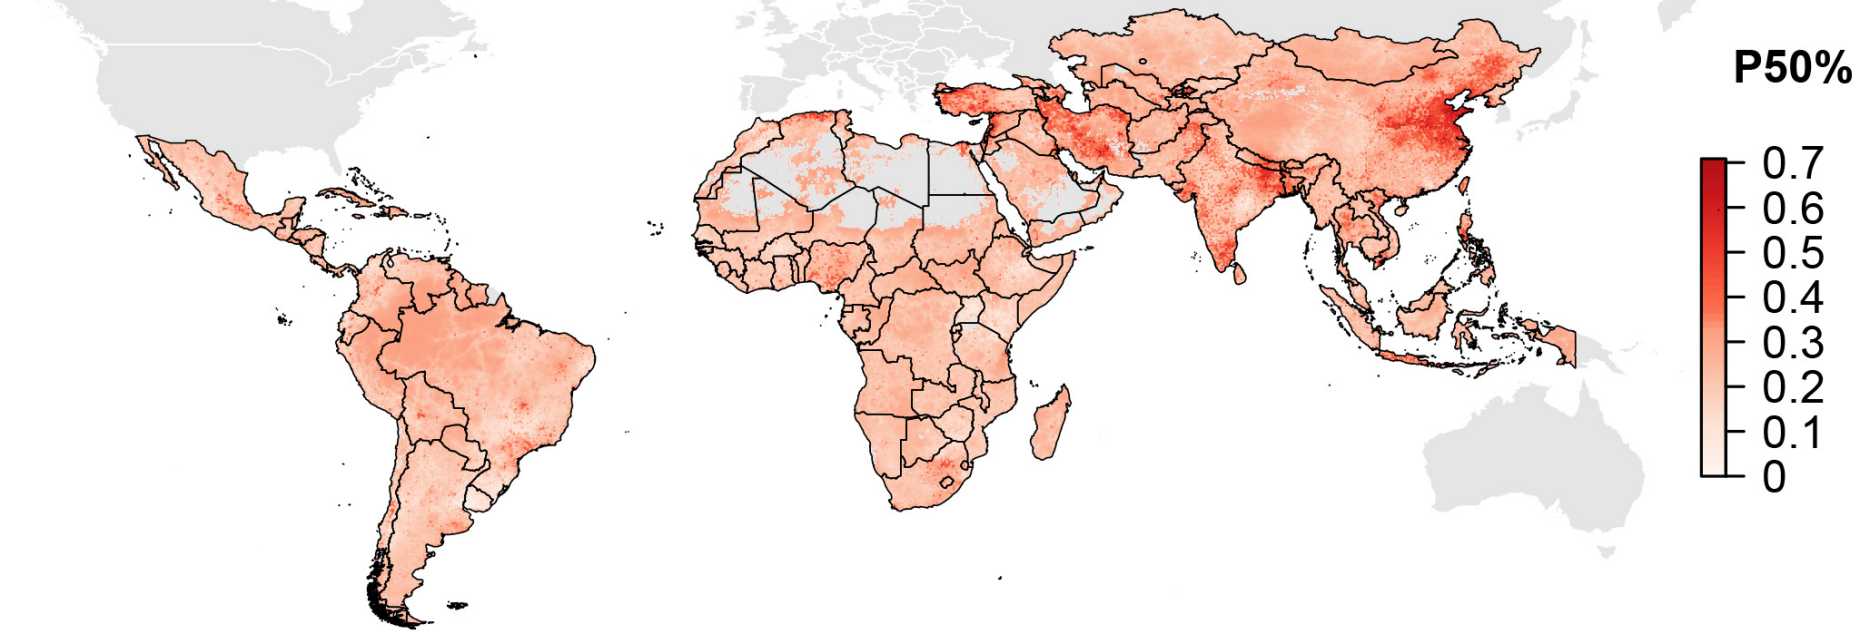 Geographic distribution of antimicrobial resistance in LMIC. P50 is indicating the proportion of antimicrobial compounds with resistance higher than 50%. (Source: Van Boeckel et al., Science 365, eaaw1944 (2019))